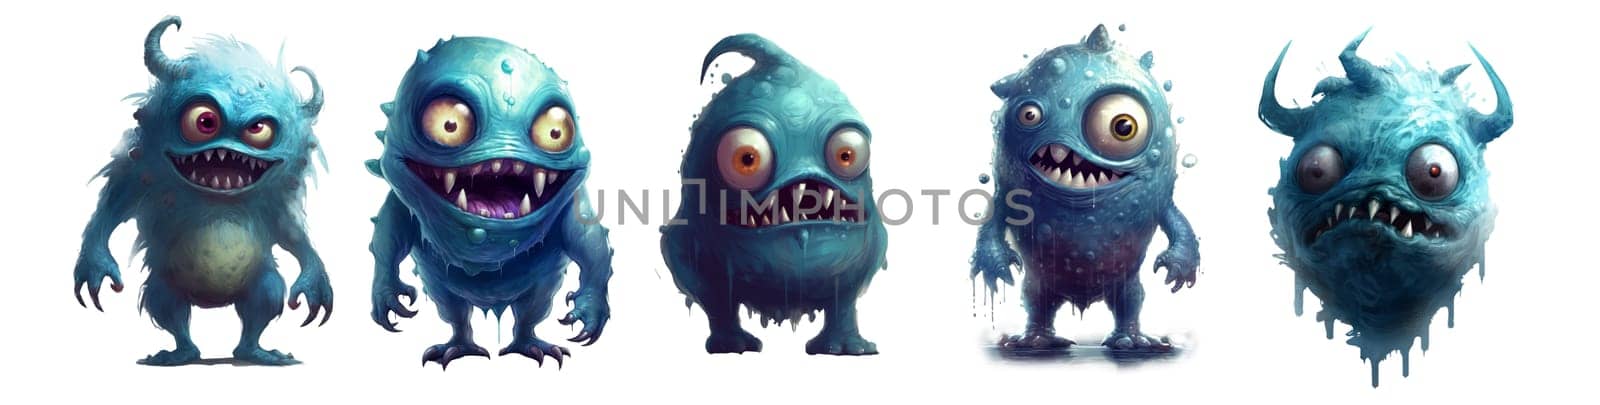 five funny blue monster with alpha channel by studiodav